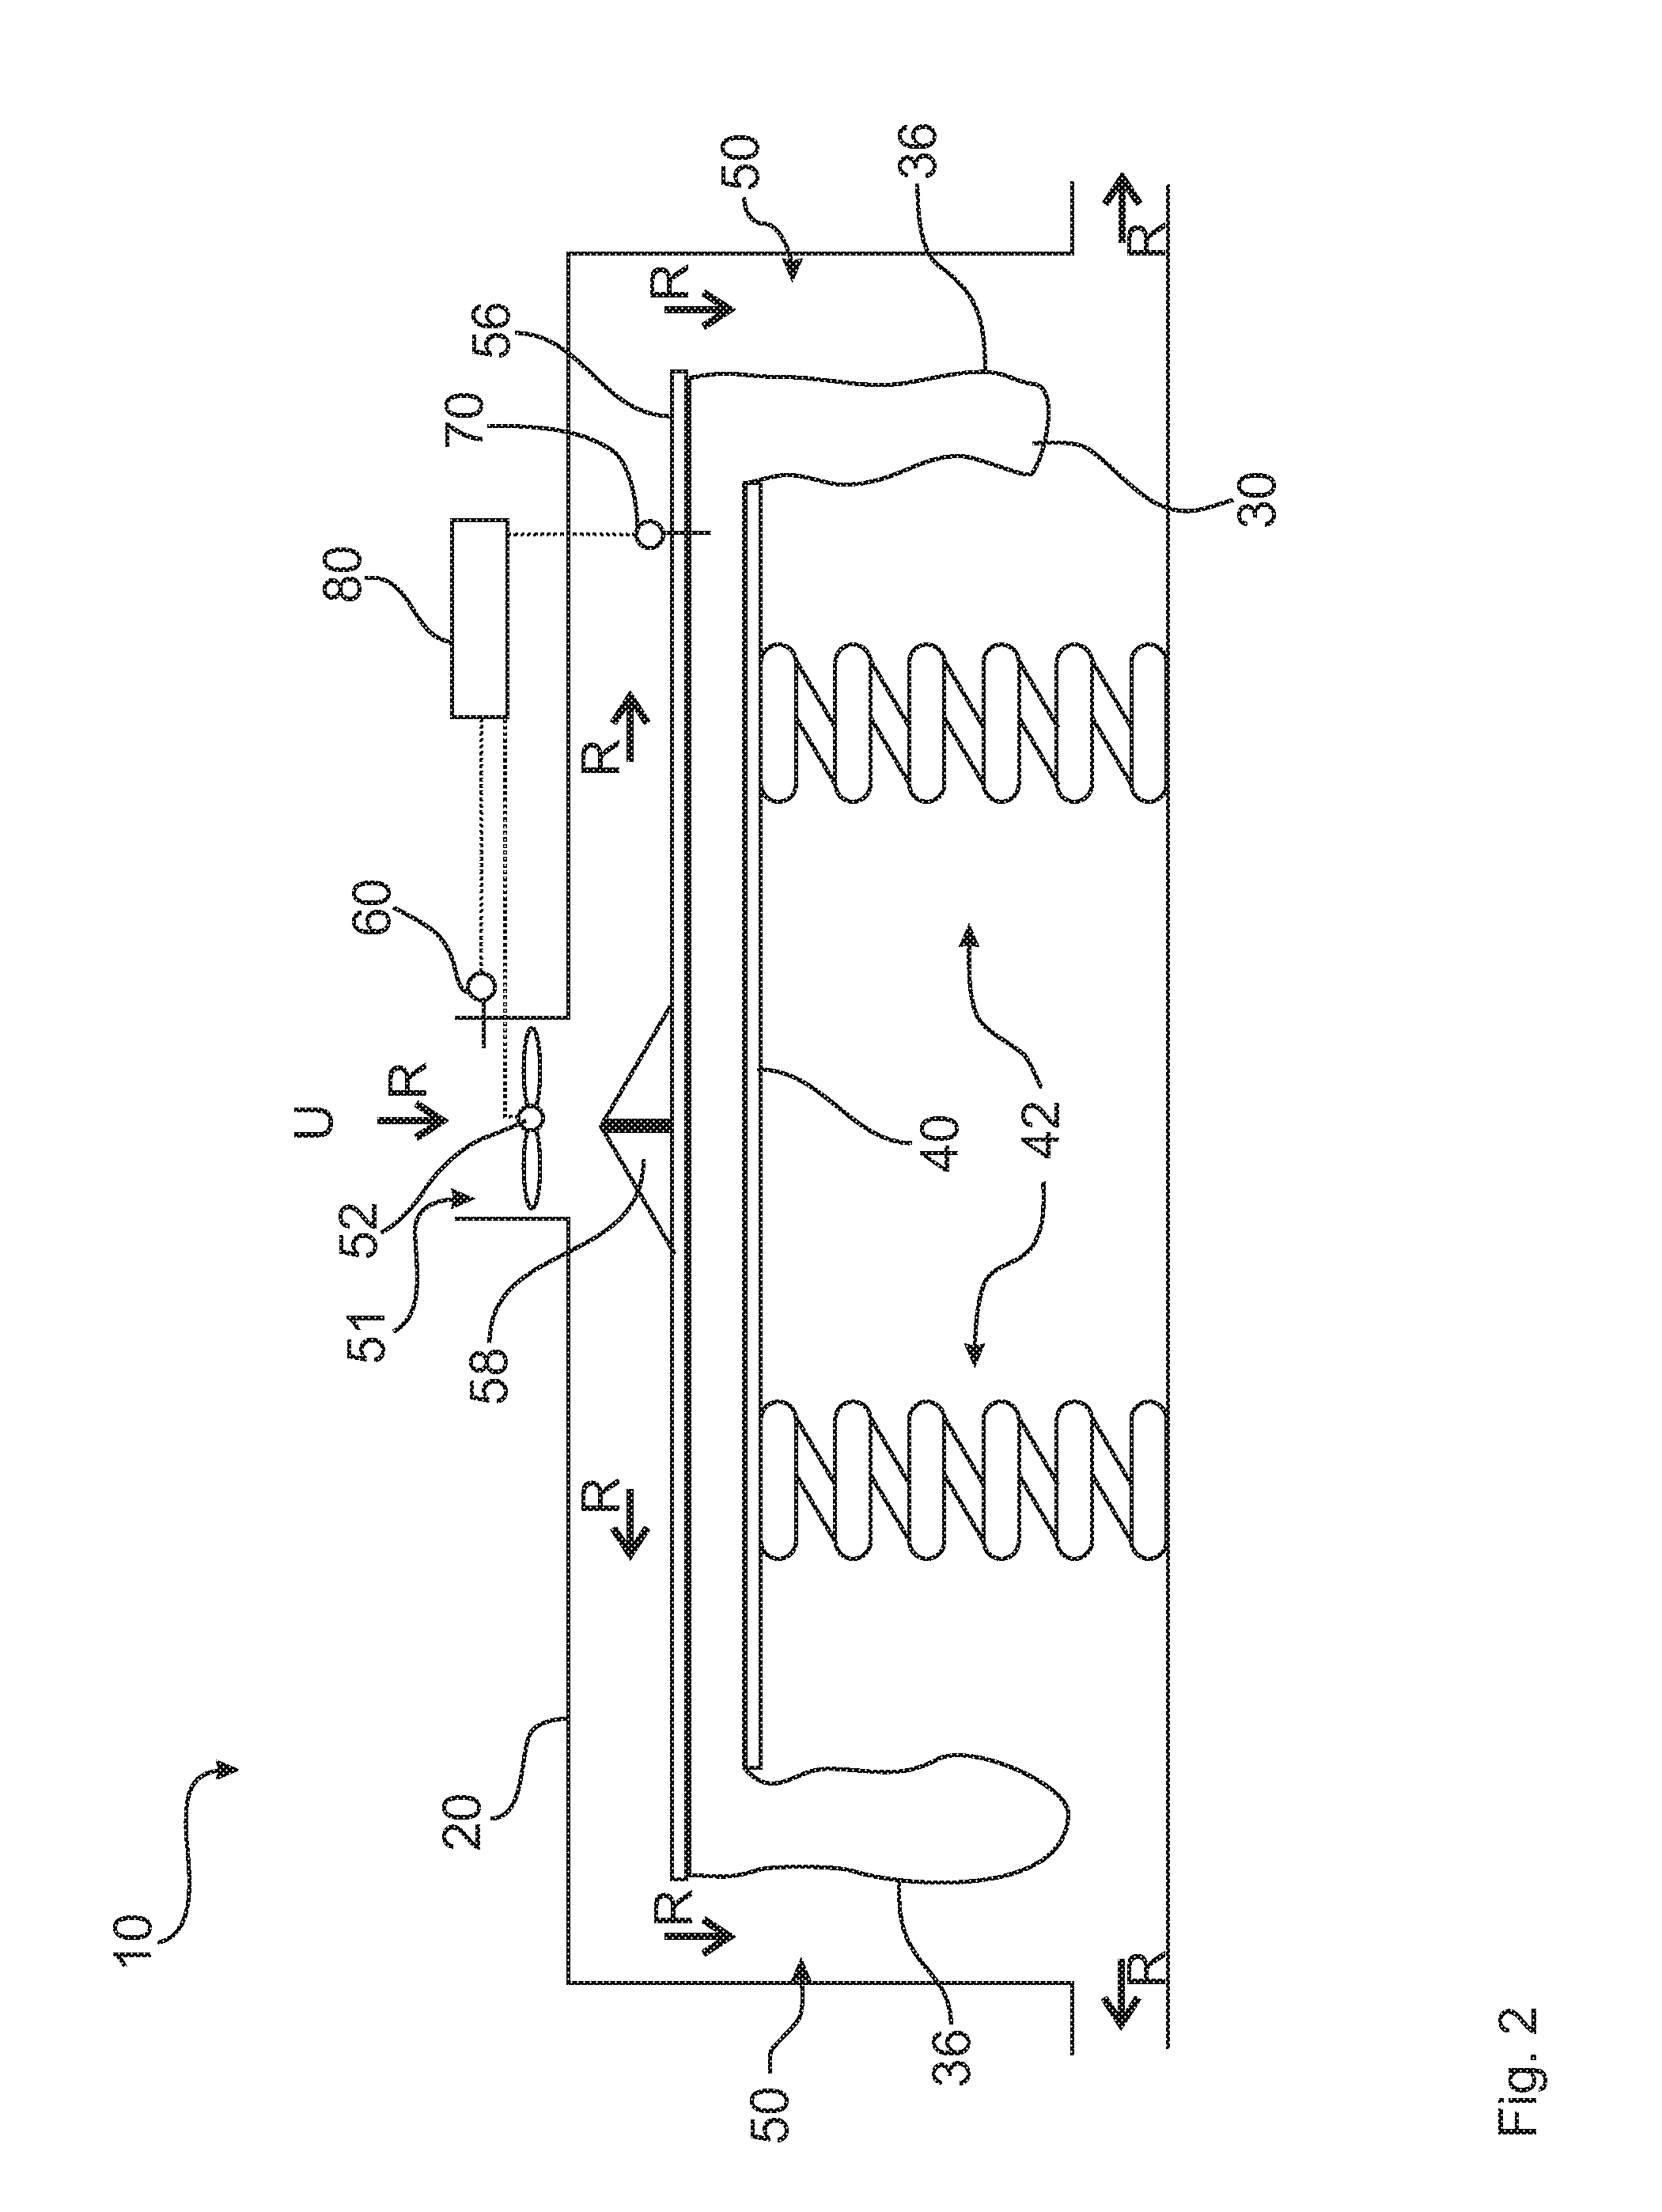 Cooling device for a protective respiratory apparatus